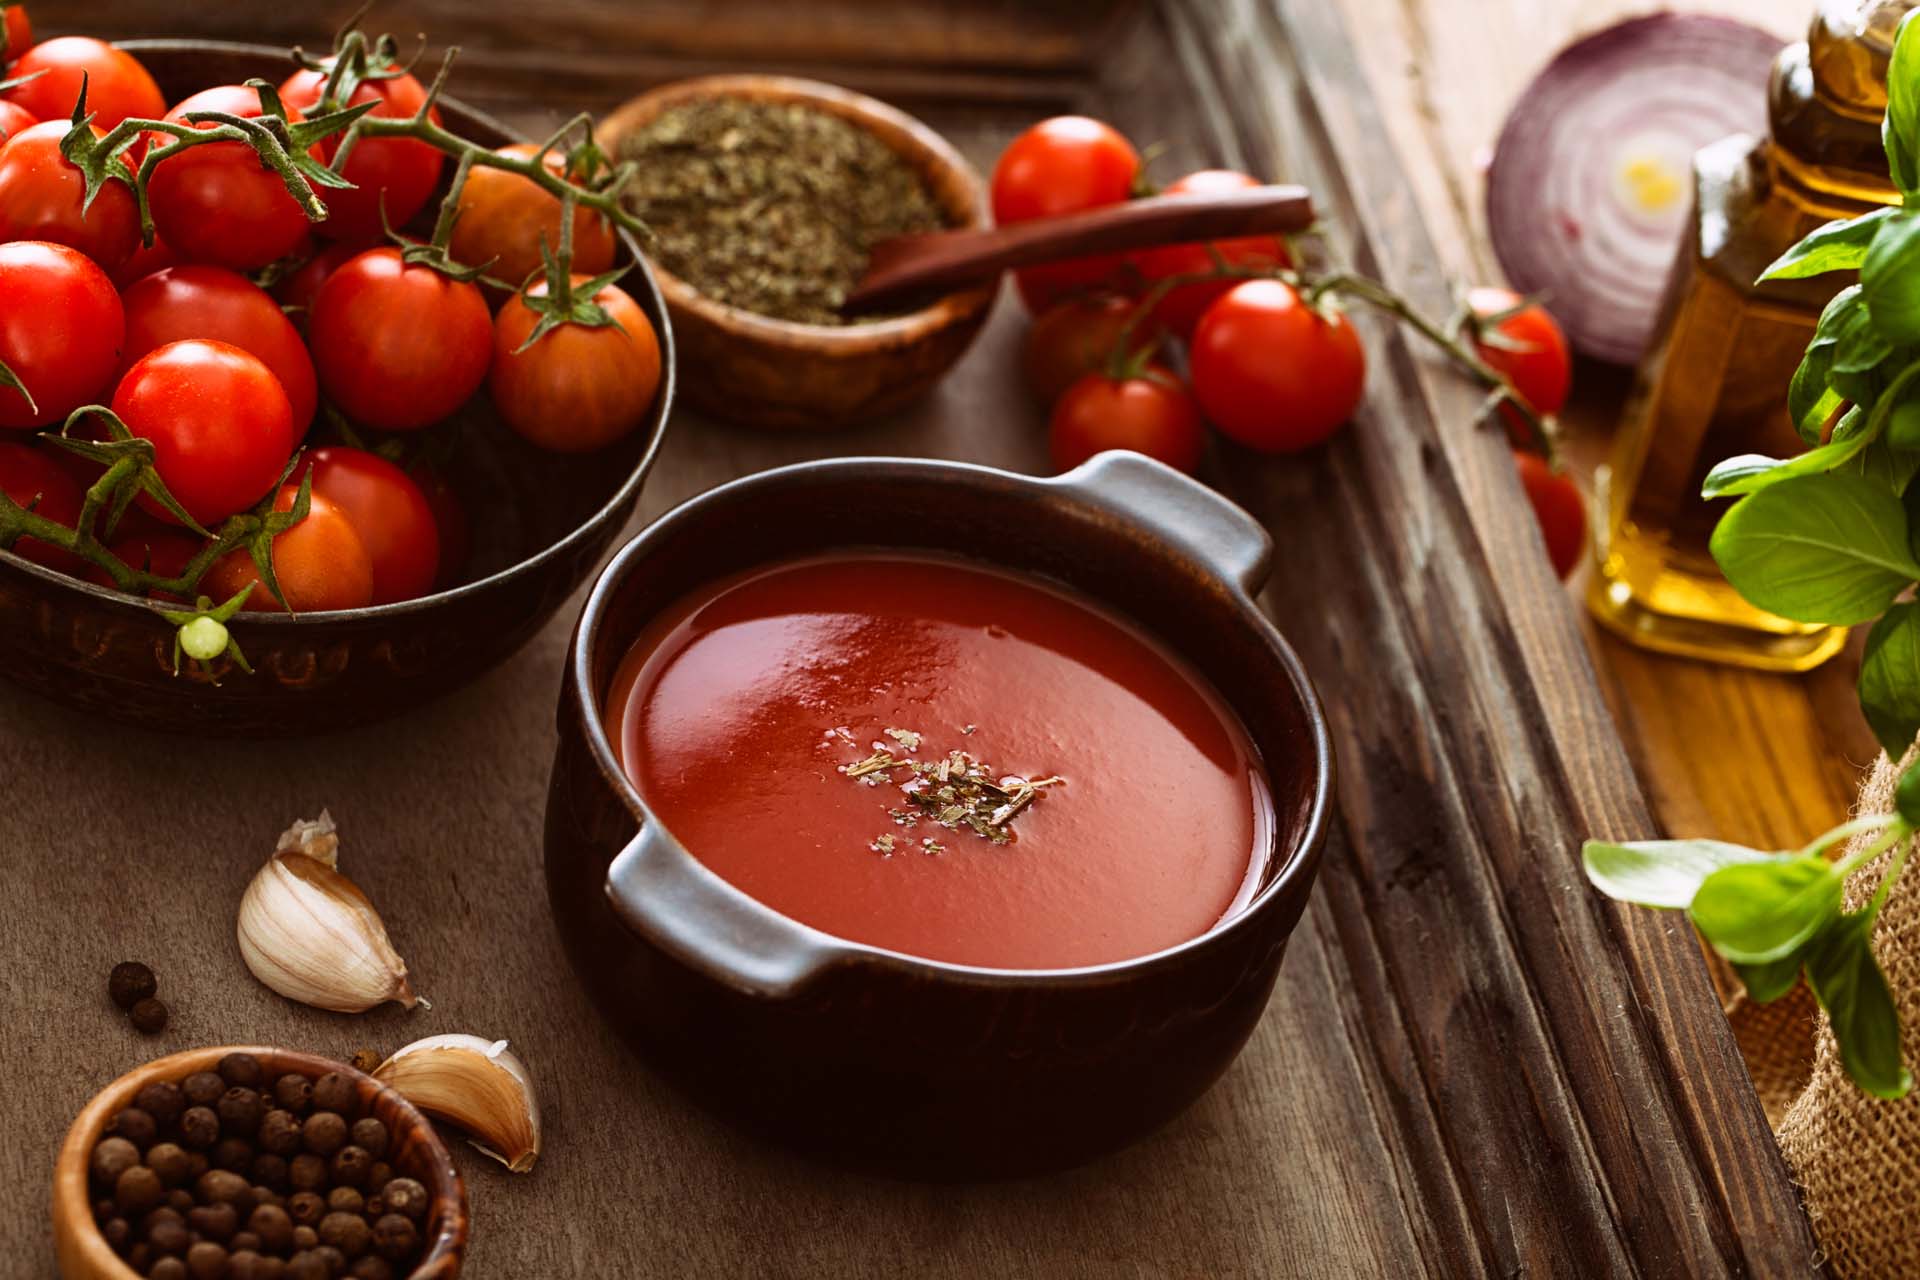 A bowl of tomato soup surrounded by fresh tomatoes on a worktop